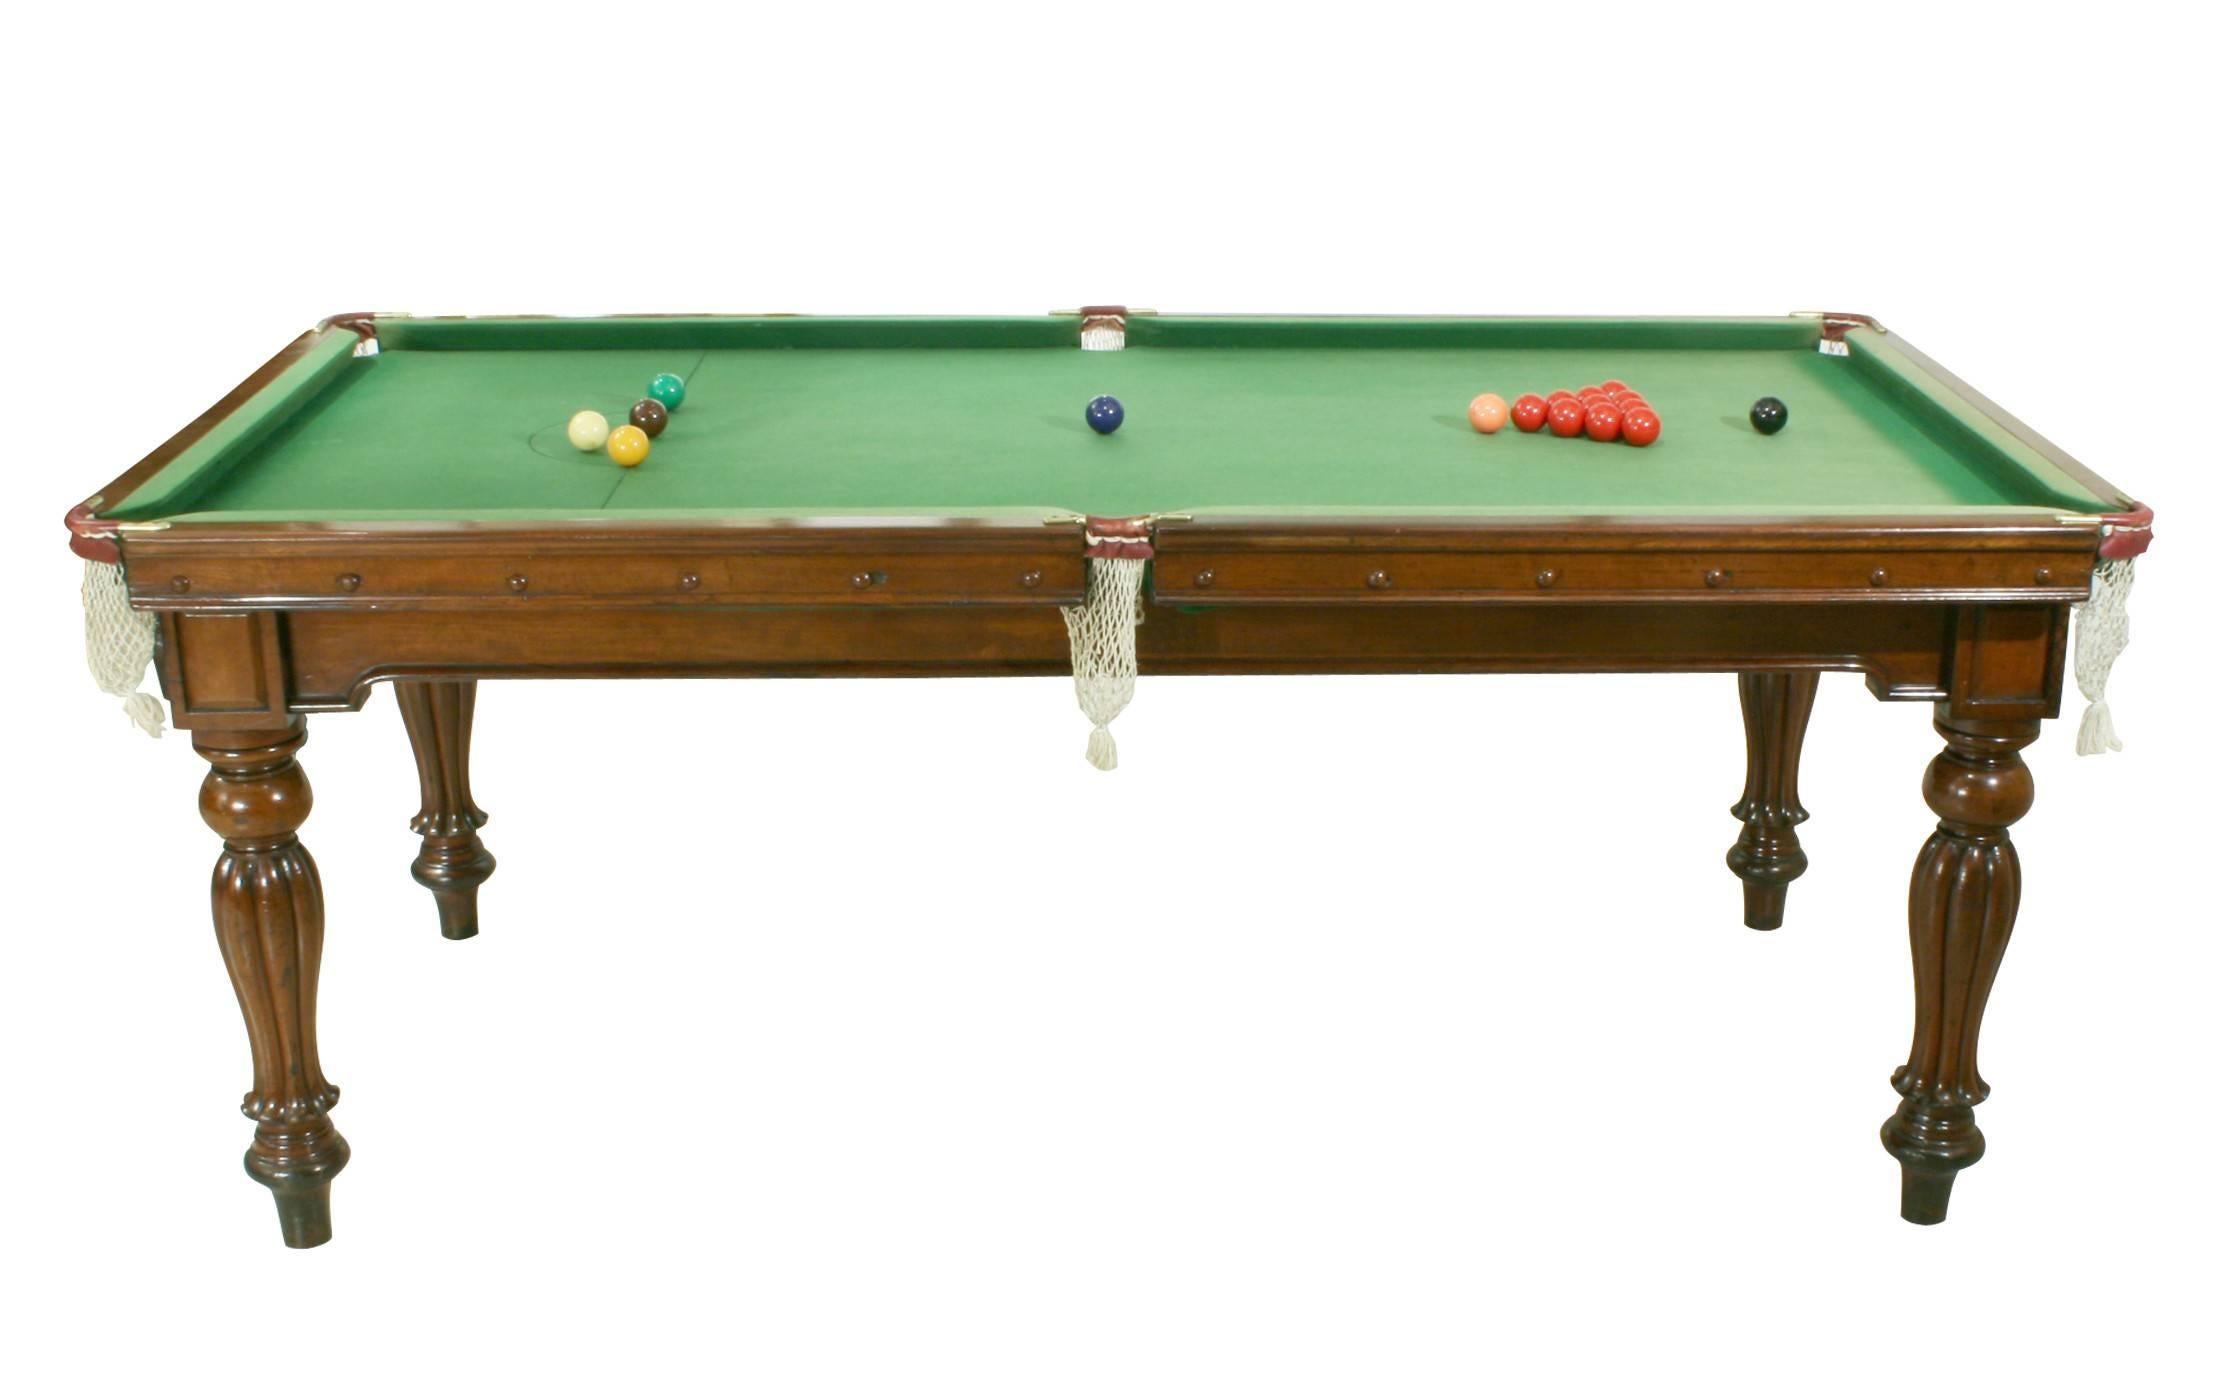 Snooker, billiard table. 
A late Victorian mahogany snooker, billiards table by Orme & Sons of Manchester. The table is with good colour and patination, a playing surface of slate covered in 100% English Wool napped cloth. The pockets are with